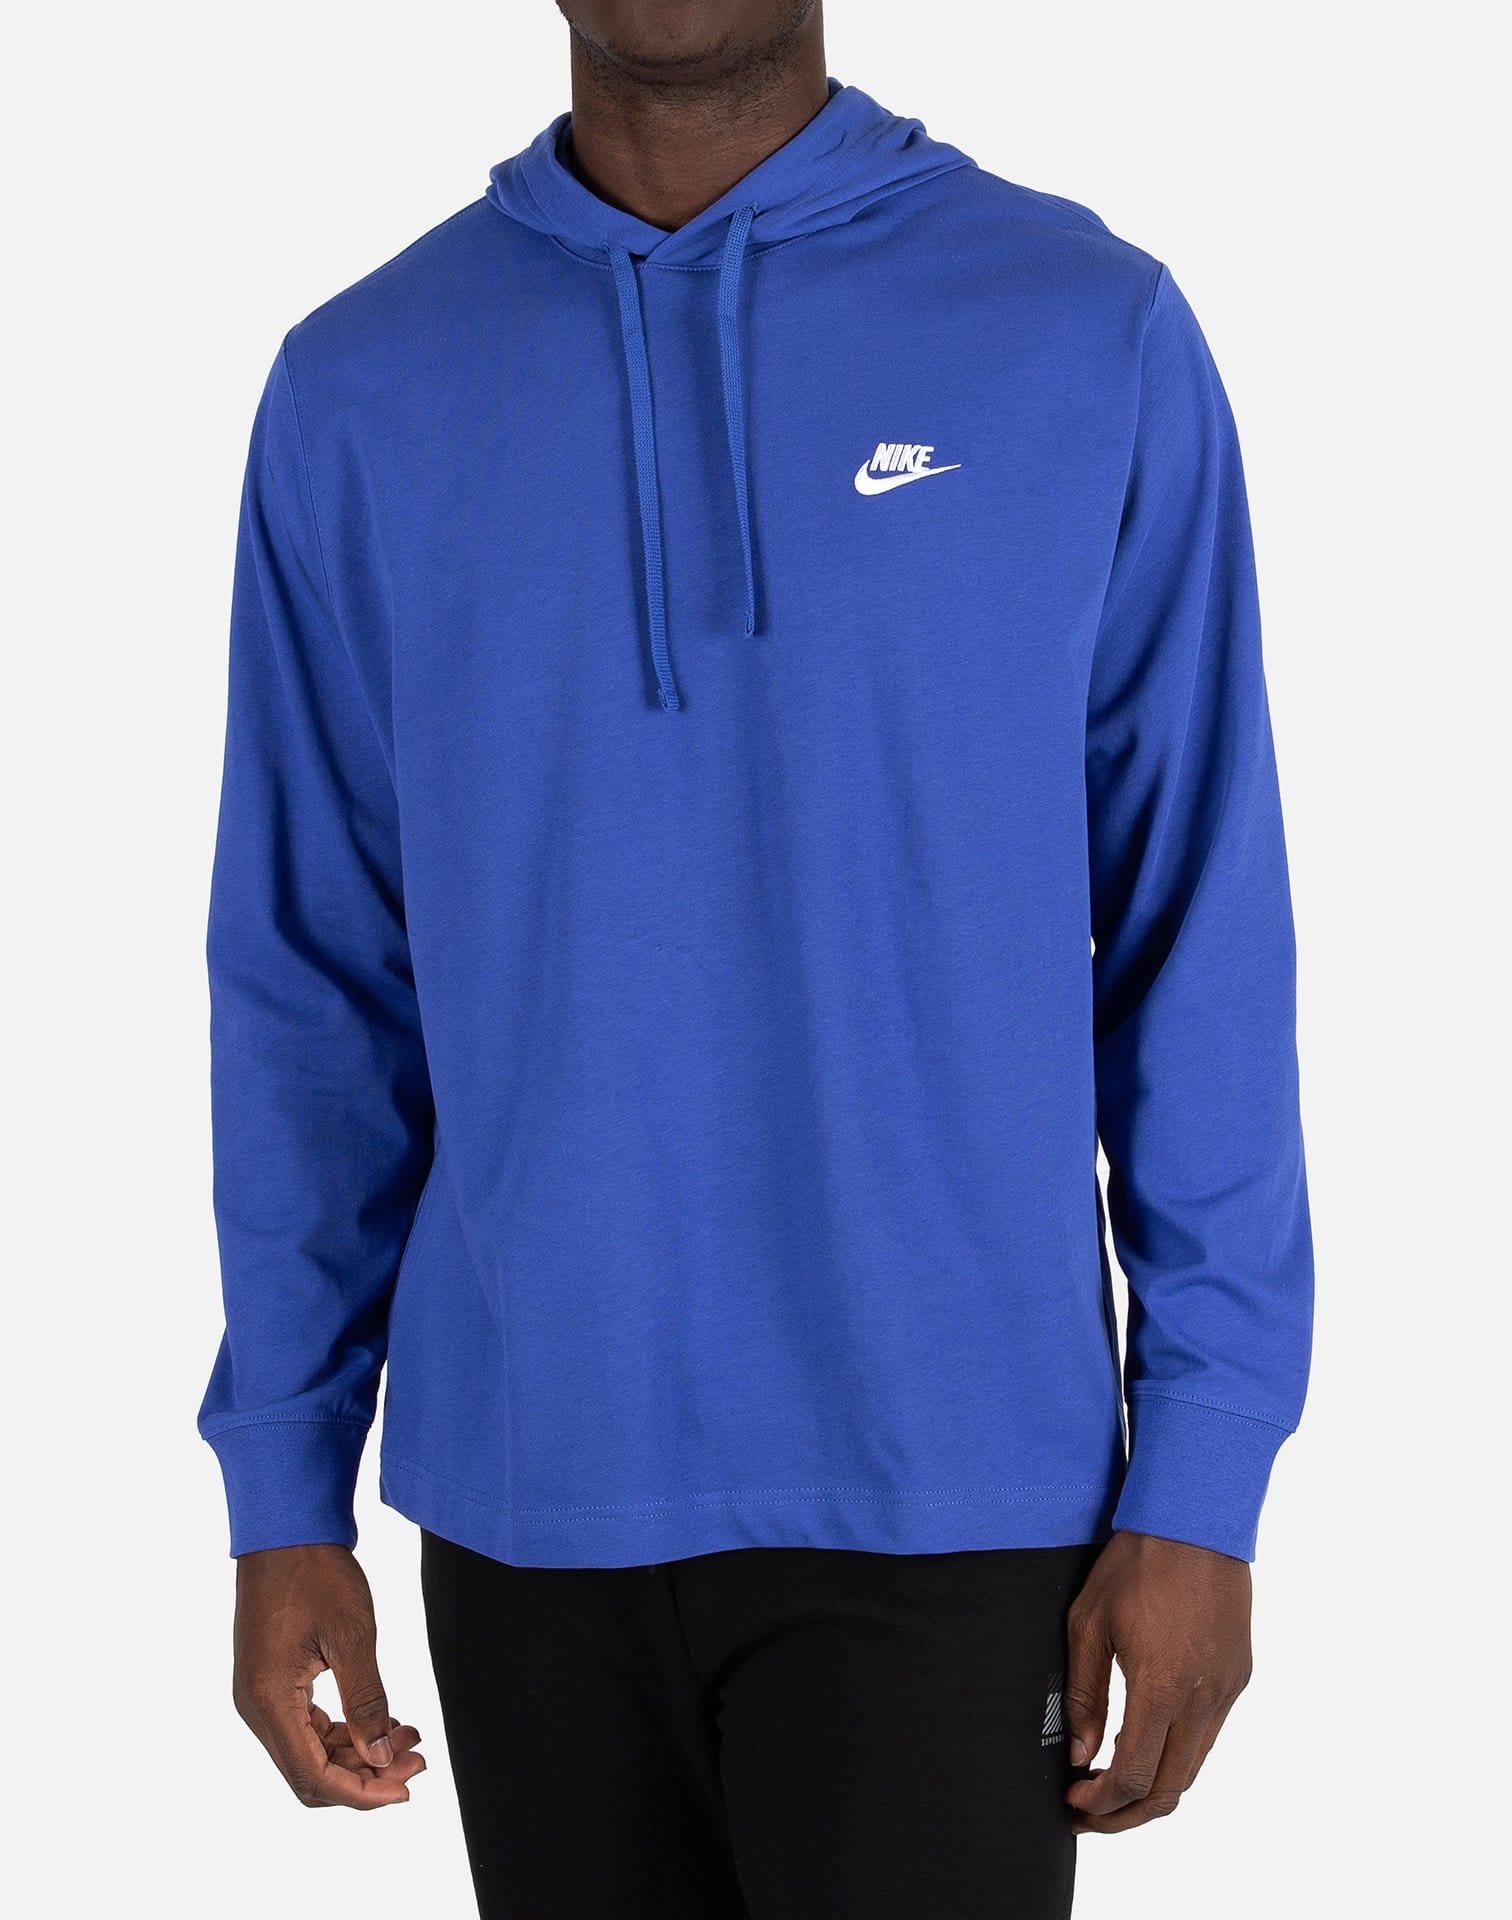 NSW CLUB PULLOVER JERSEY HOODIE – DTLR